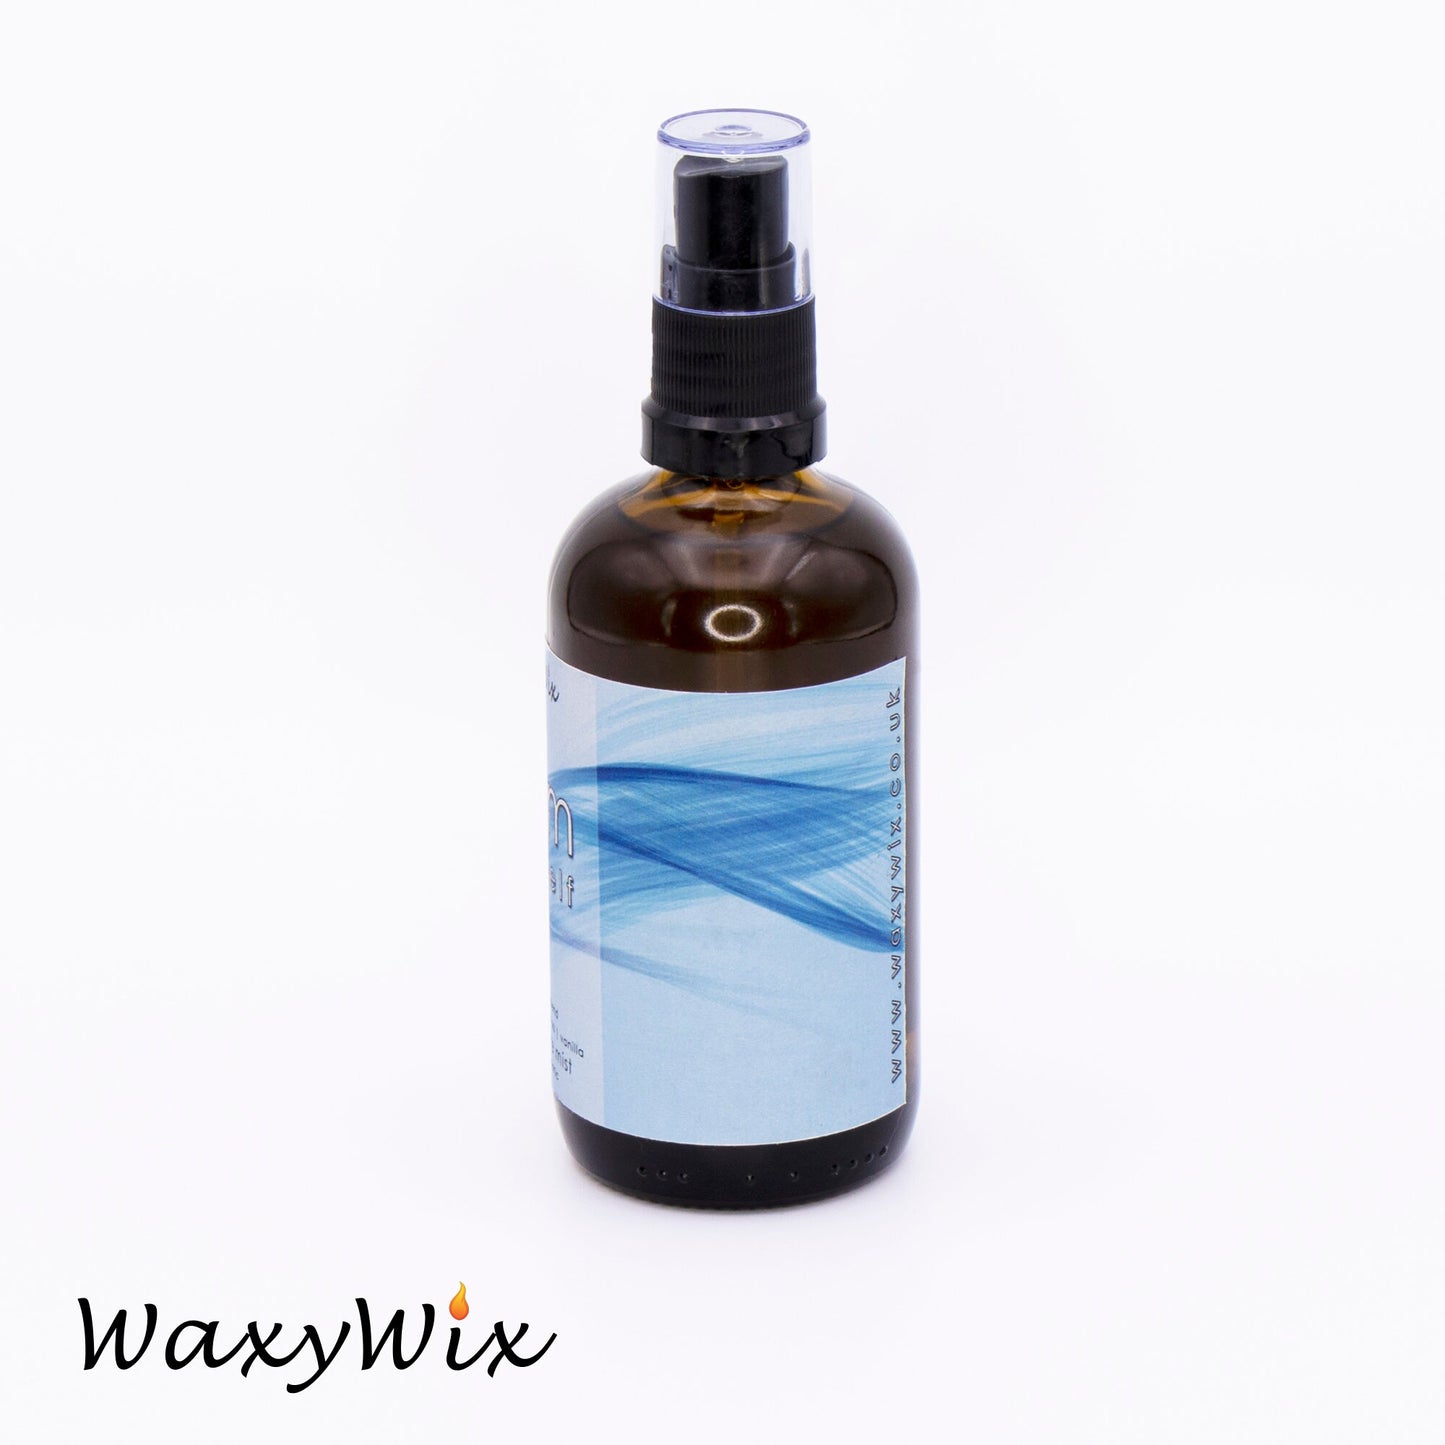 Anxiety relief atmosphere mist